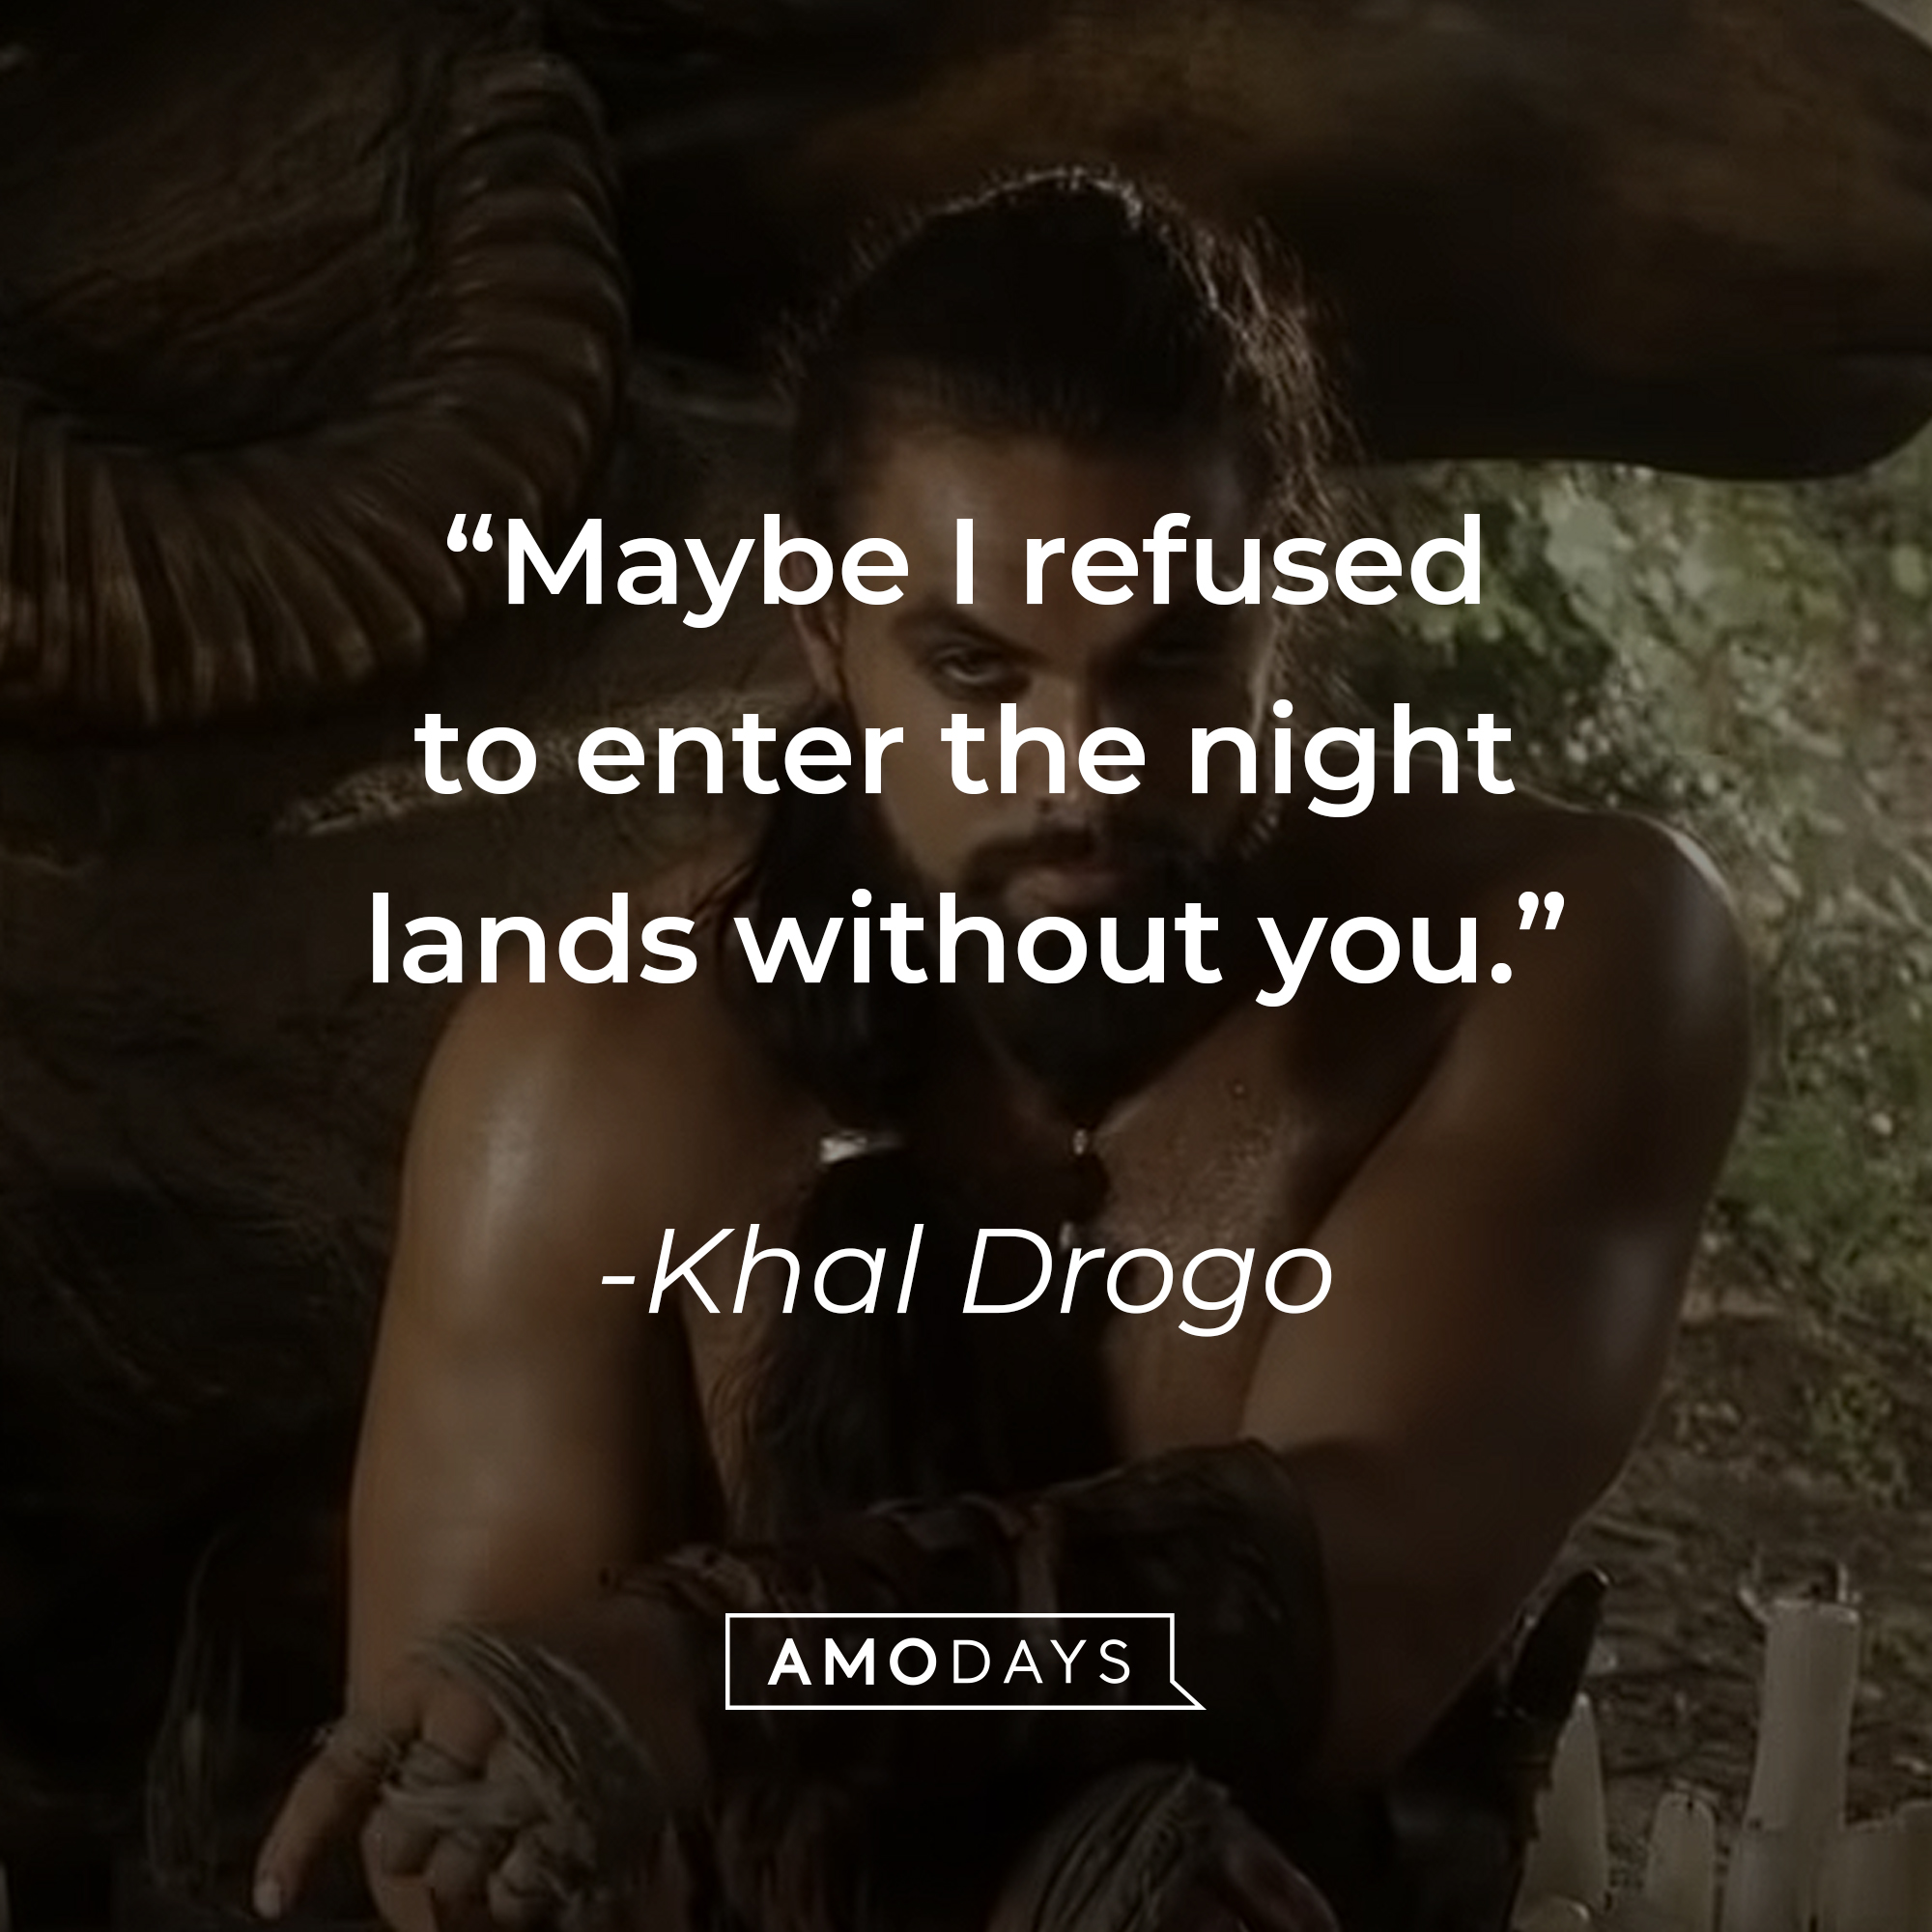 Khal Drogo's quote: "Maybe I refused to enter the night lands without you." | Source: youtube.com/gameofthrones